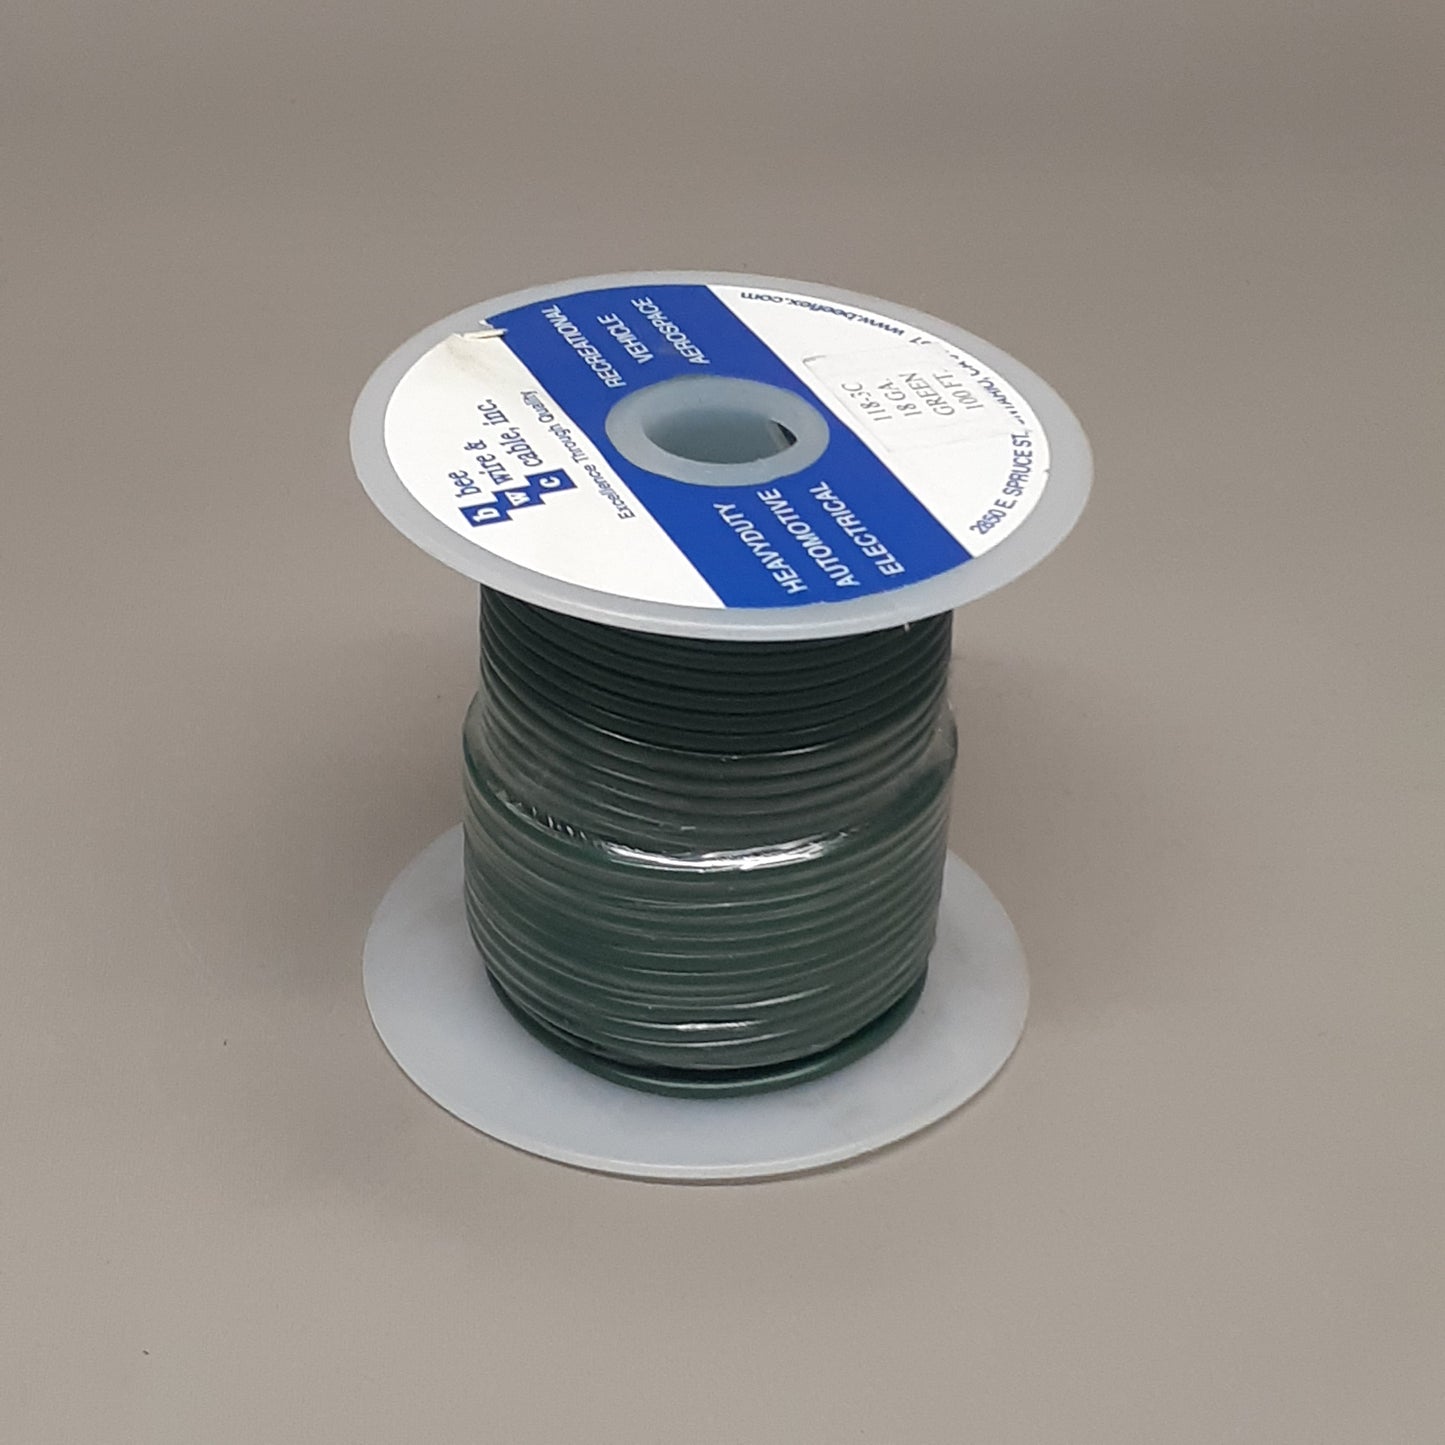 BEE WIRE & CABLE INC. 2-Pack! 100' Heavy Duty Green Cable 118-3A (New)